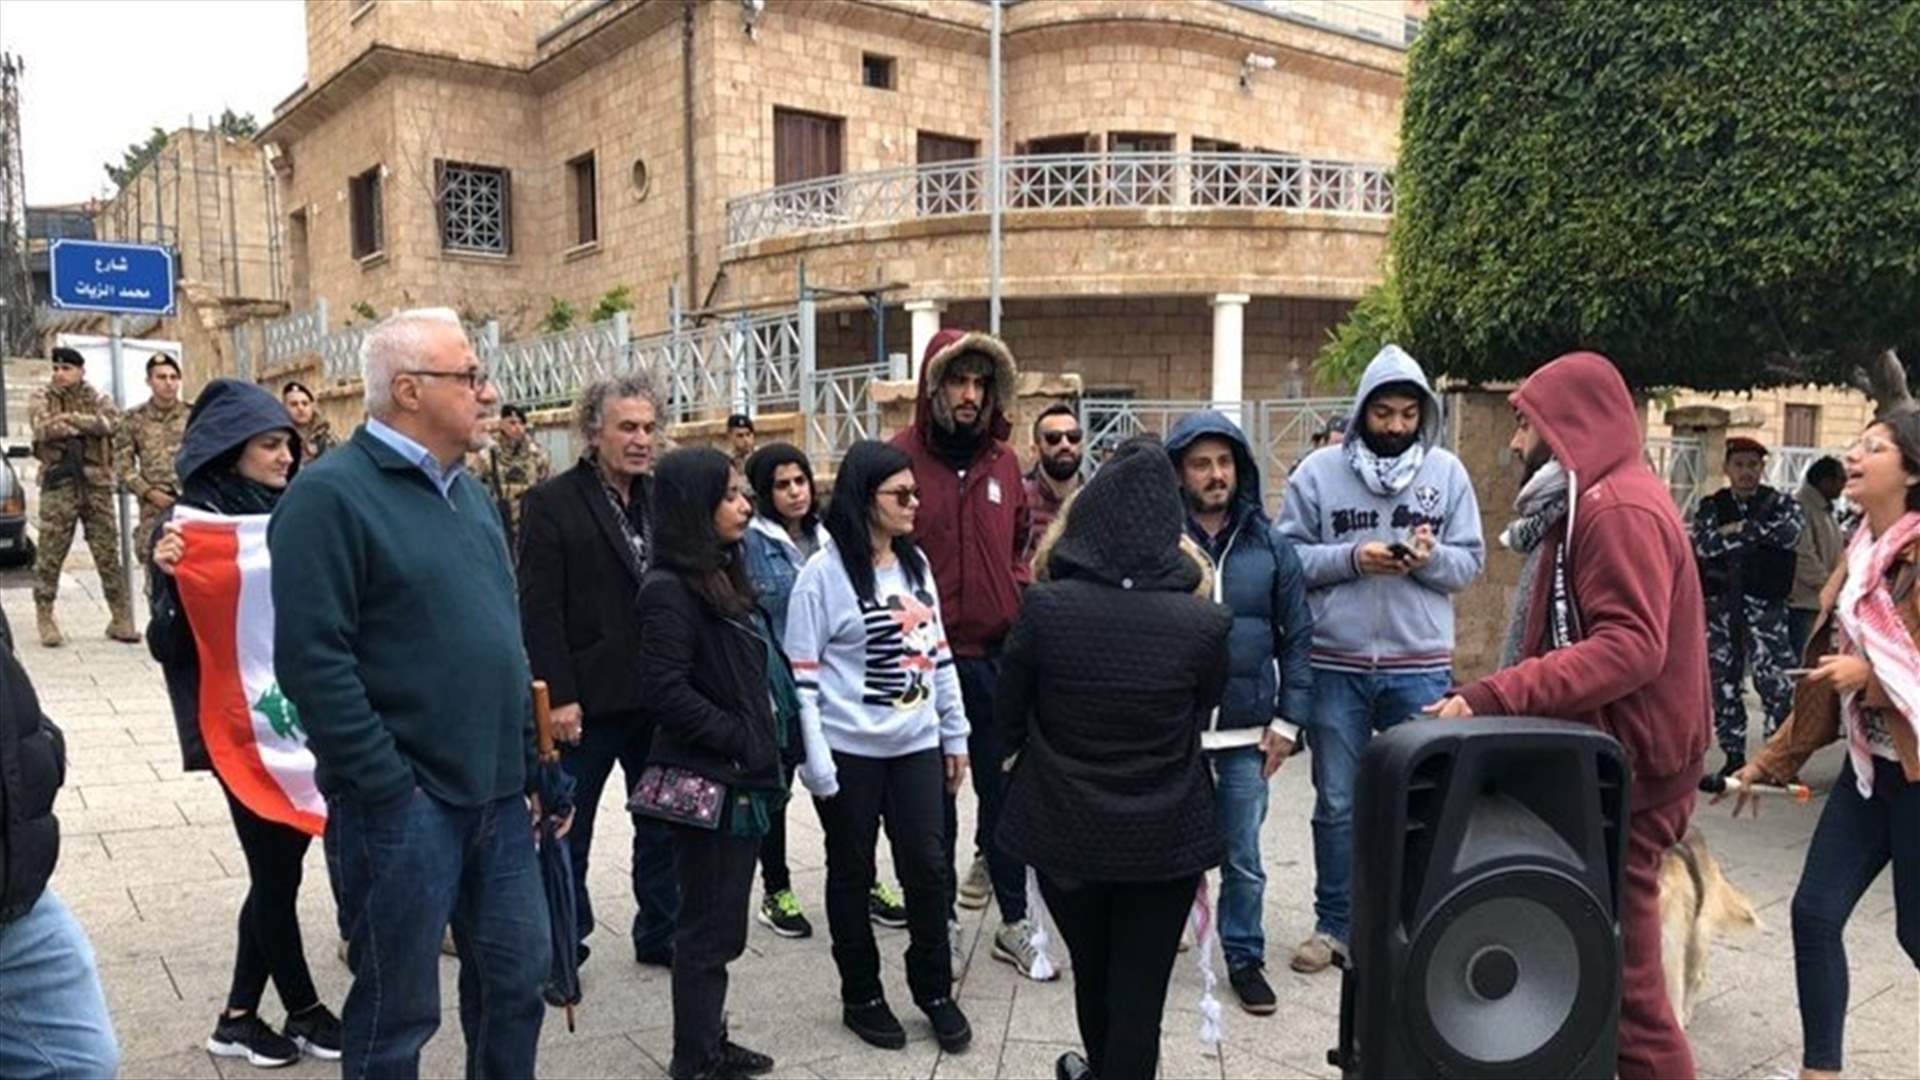 Protesters stage sit-in outside central bank in Tyre (Video)